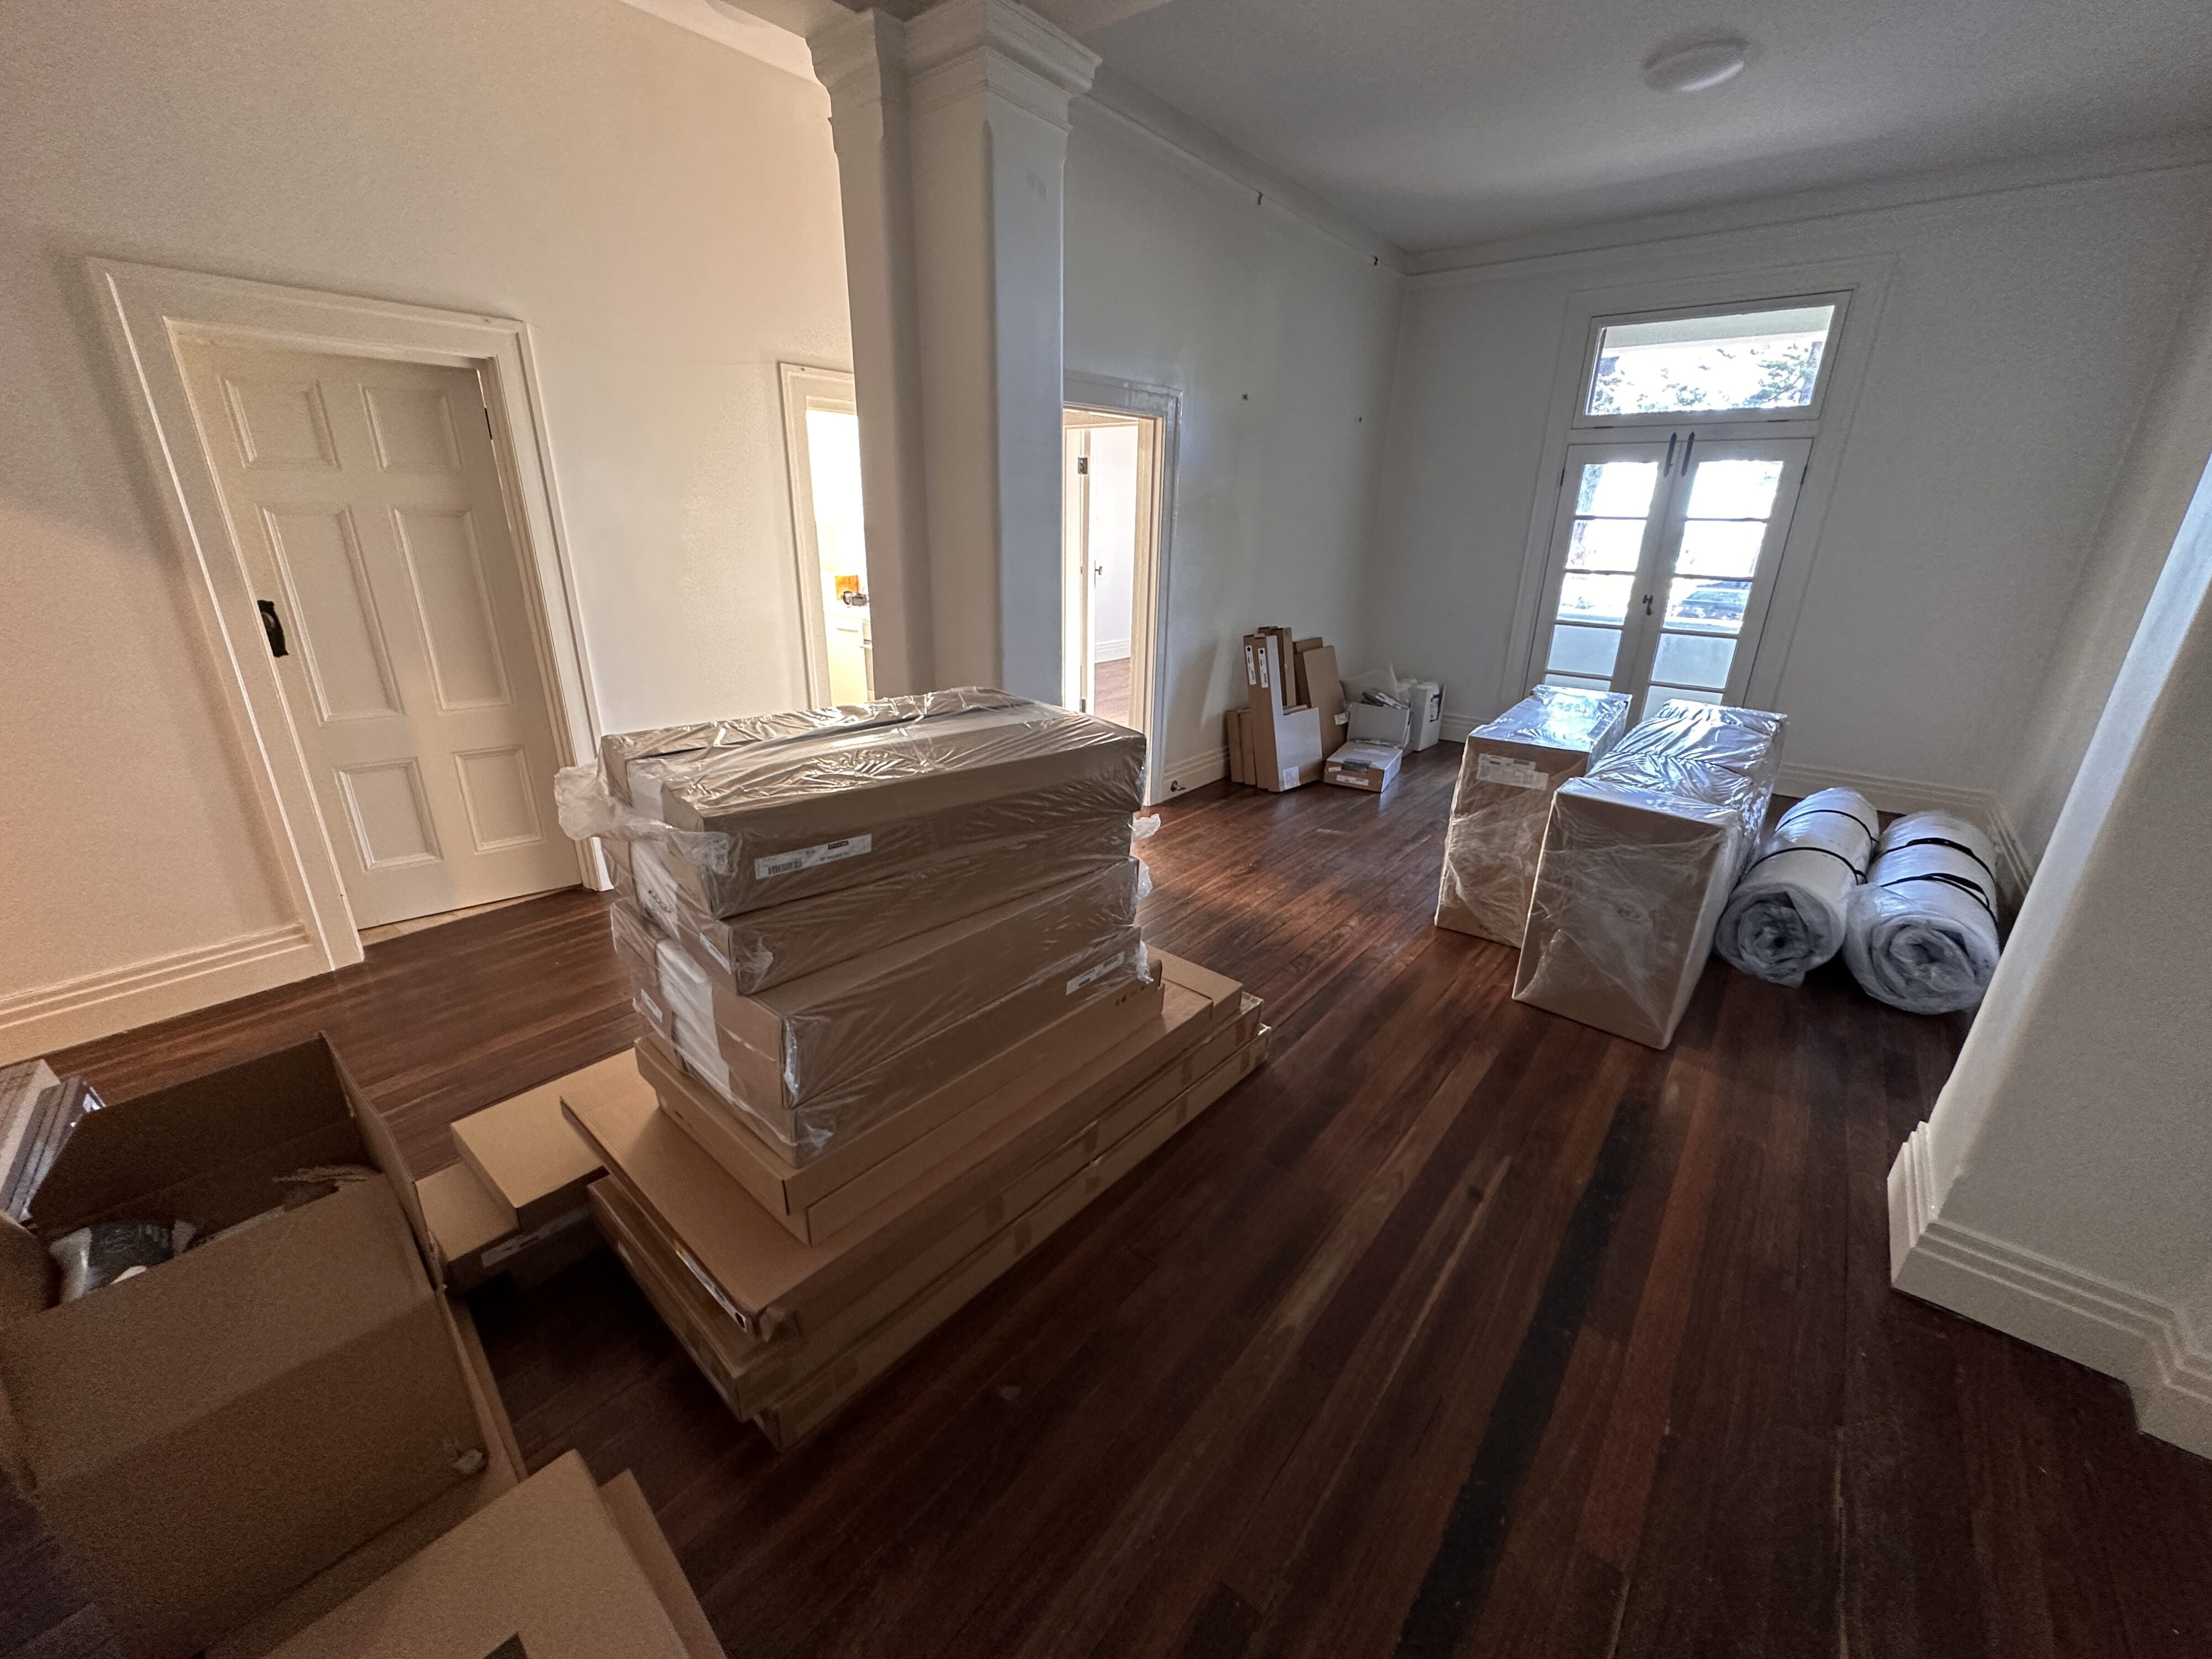 a room with boxes and cardboard boxes